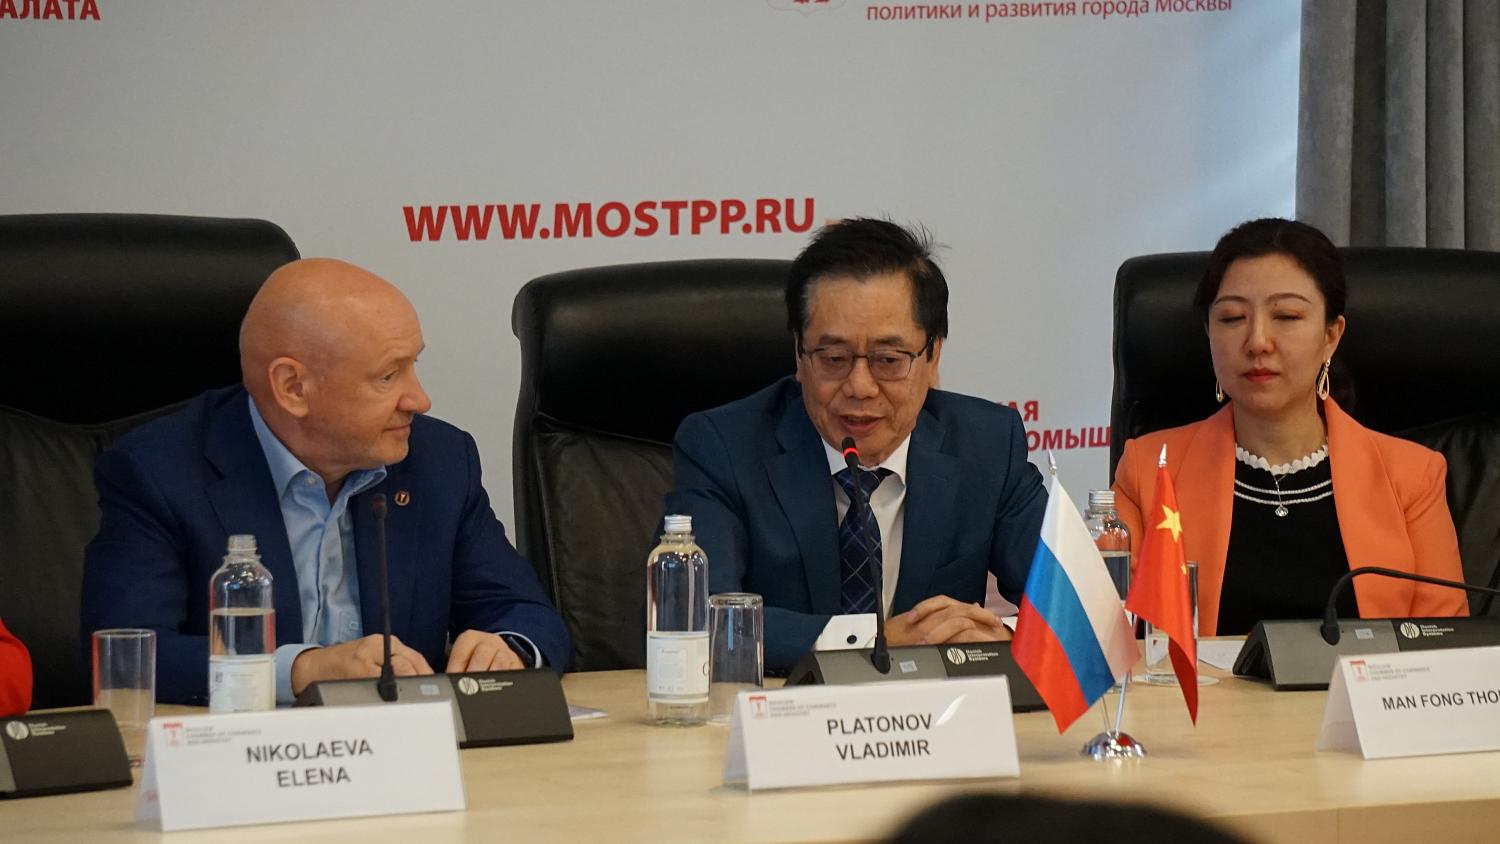 Moscow entrepreneurs discussed promising areas of cooperation with colleagues from China